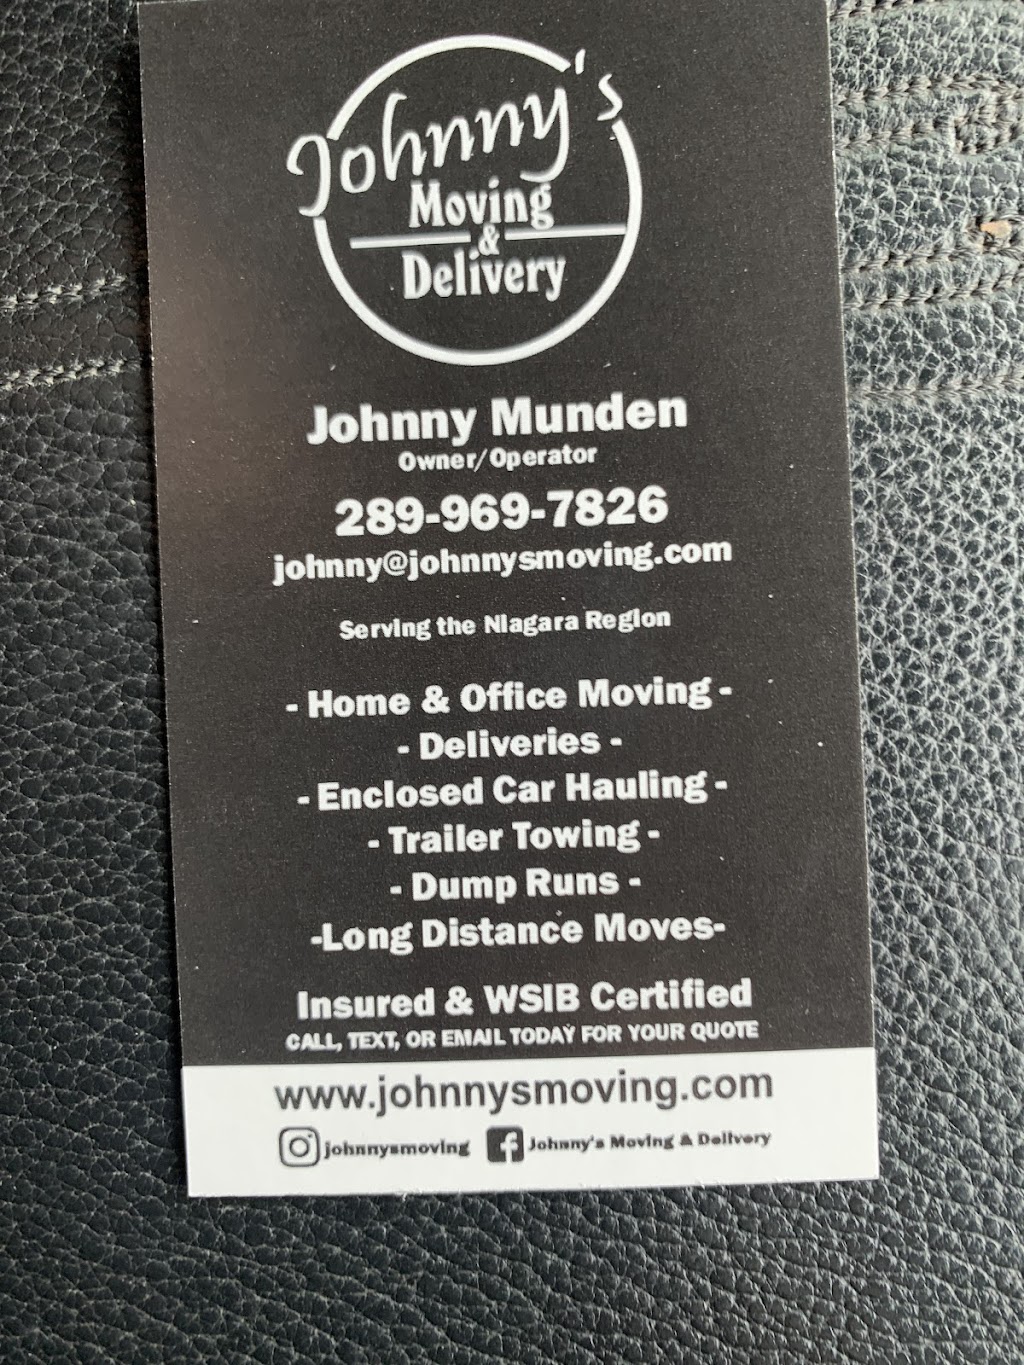 Johnnys Moving & Delivery | 514 Queenston St Unit 1A, St. Catharines, ON L2R 7K6, Canada | Phone: (289) 969-7826